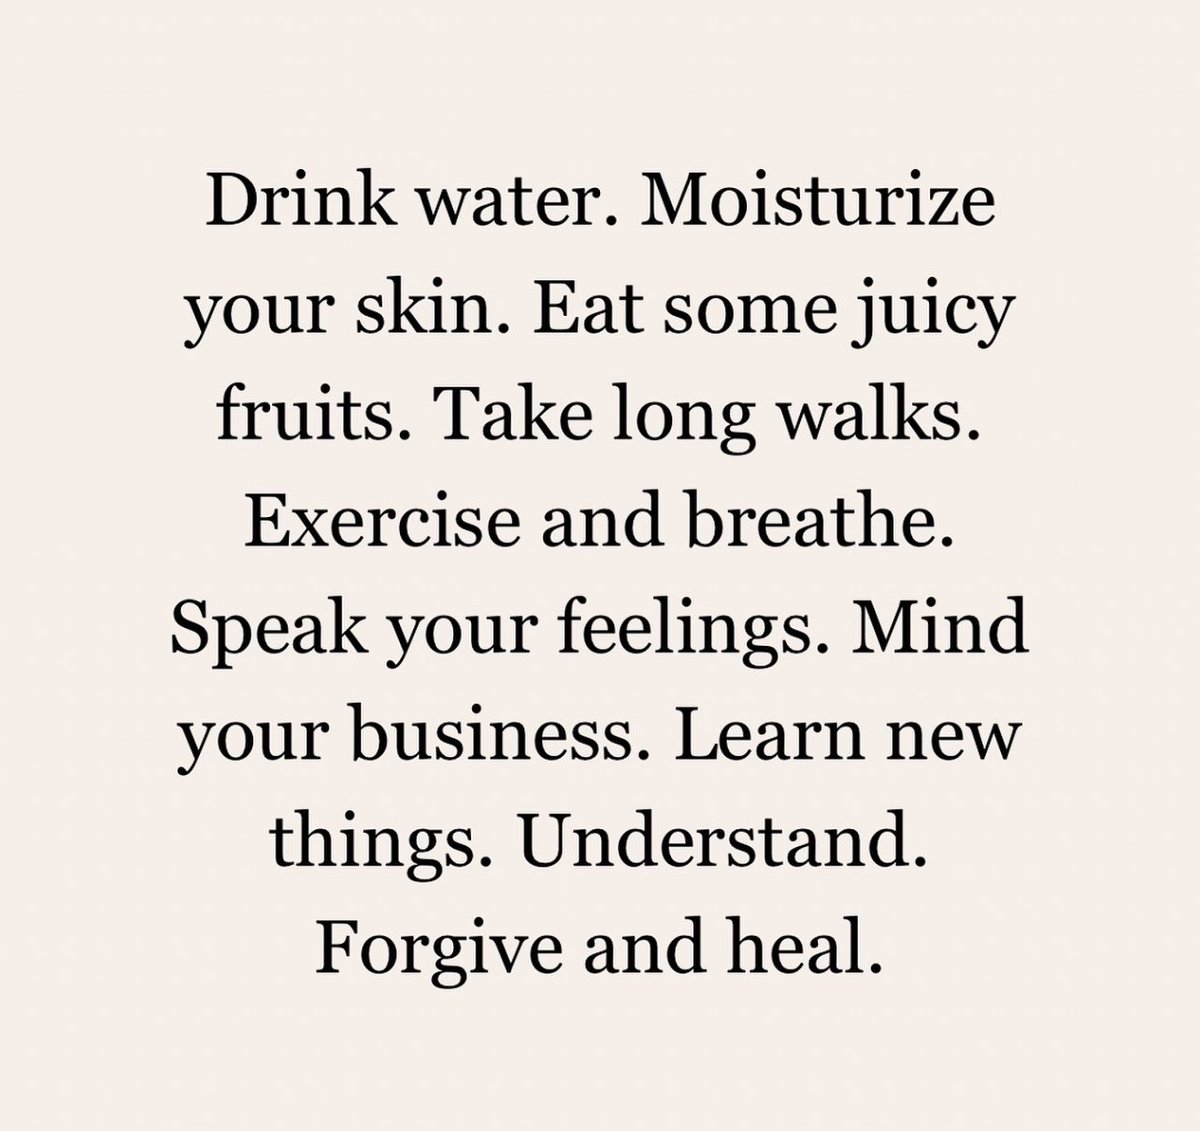 New week. New challenges. New blessings. Keep practicing self-care! #Sober #SoberAF #Recovery #RecoveryPosse #Addiction #SoberSupport #MentalHealthMatters